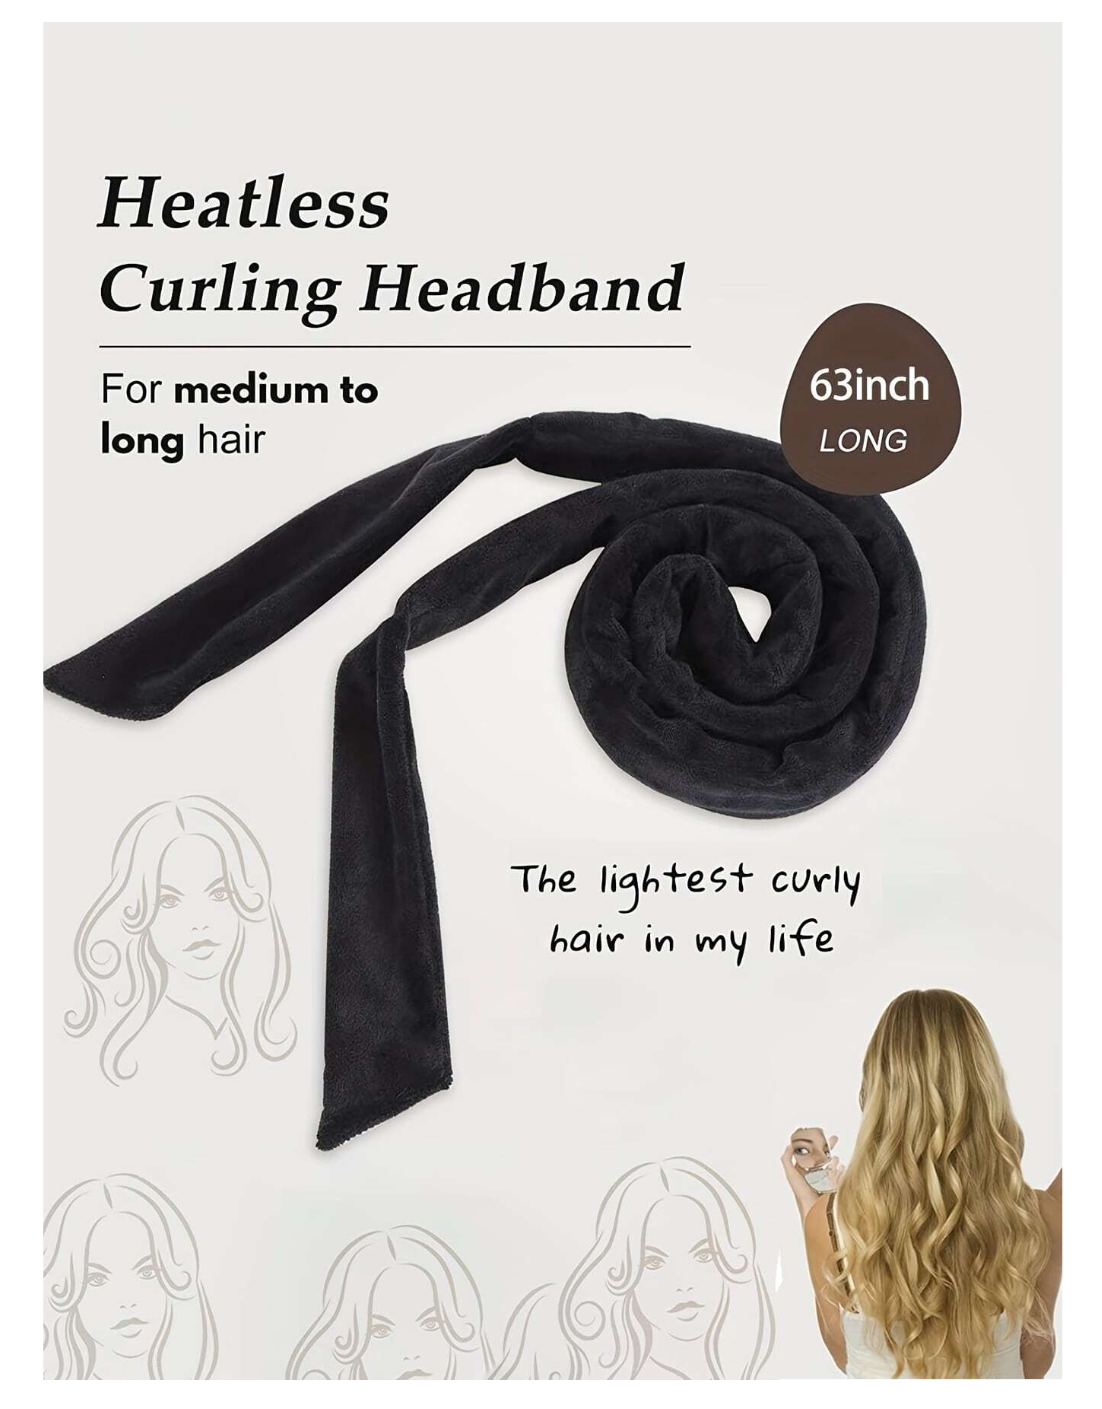 Dreamy Waves Sans the Heat: Black Friday Special on Heatless Curling Rod Headband – Unleash Your Natural Soft Wave with Sleeping Curls Ribbon Rollers!